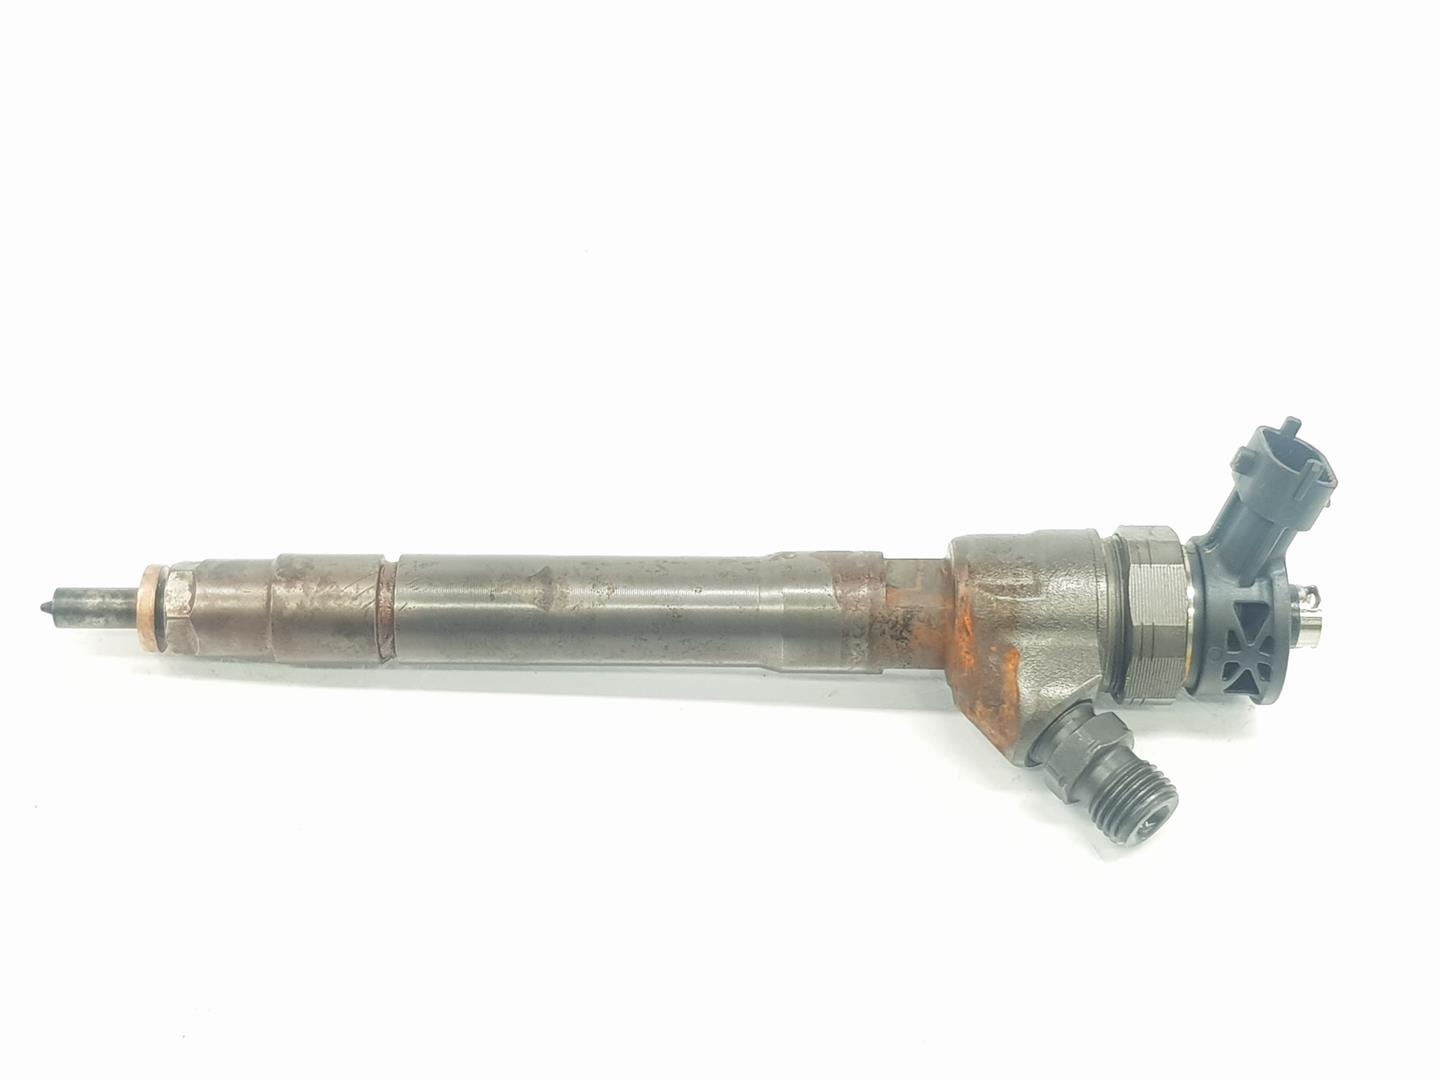 RENAULT Trafic 2 generation (2001-2015) Fuel Injector 166105302R, 166105302R, 1111AA 24224237